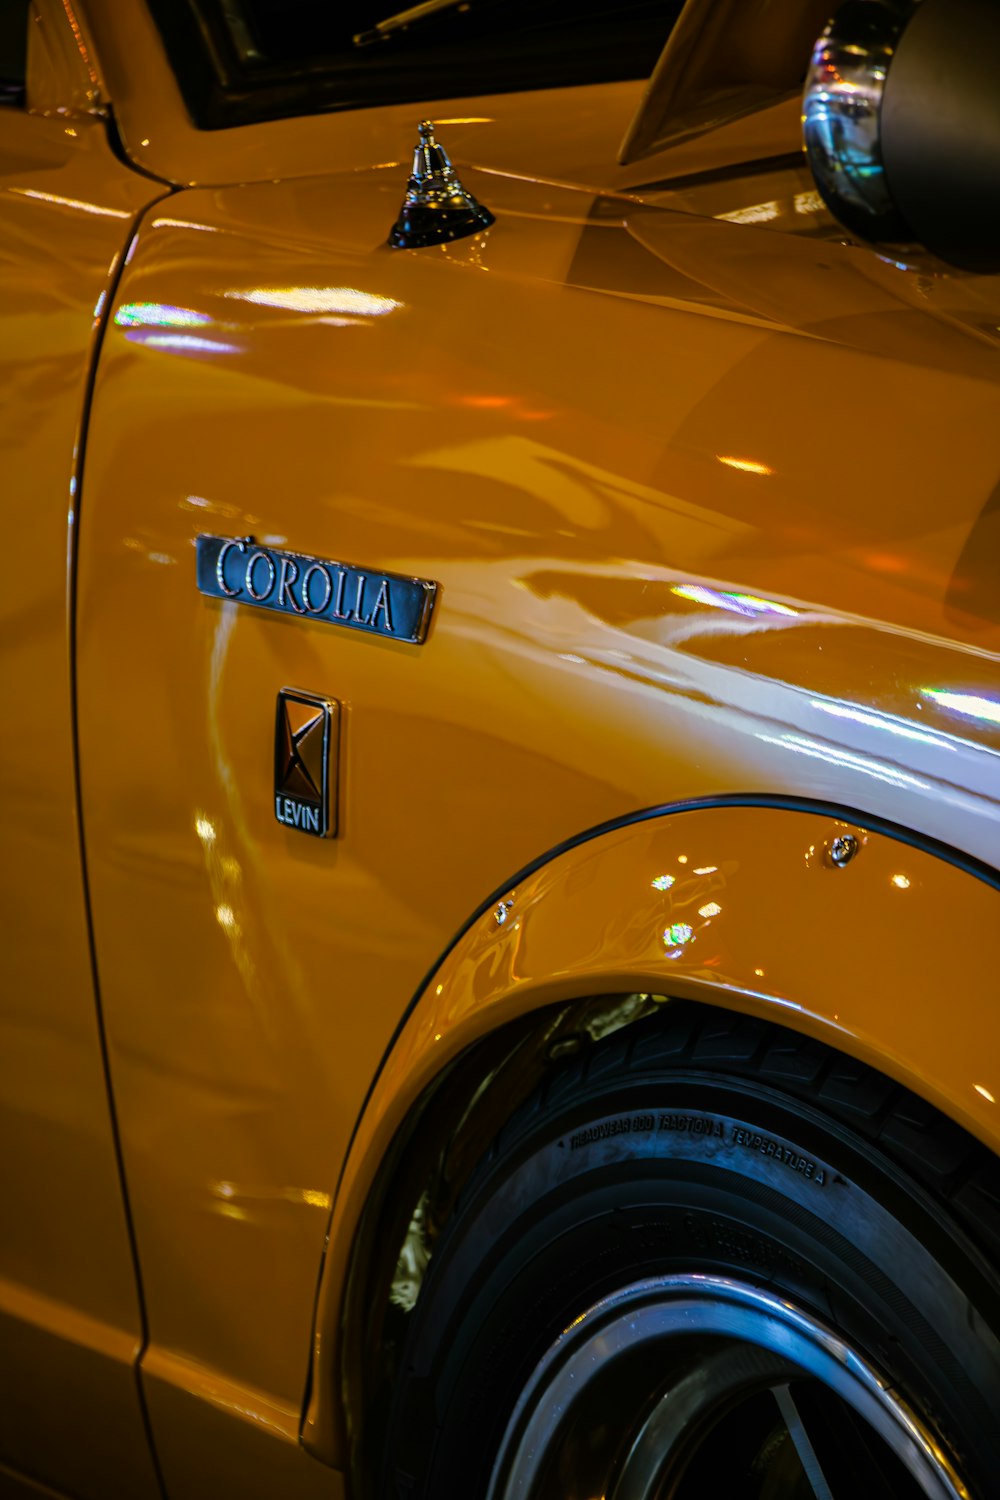 a close up of the emblem on a yellow car